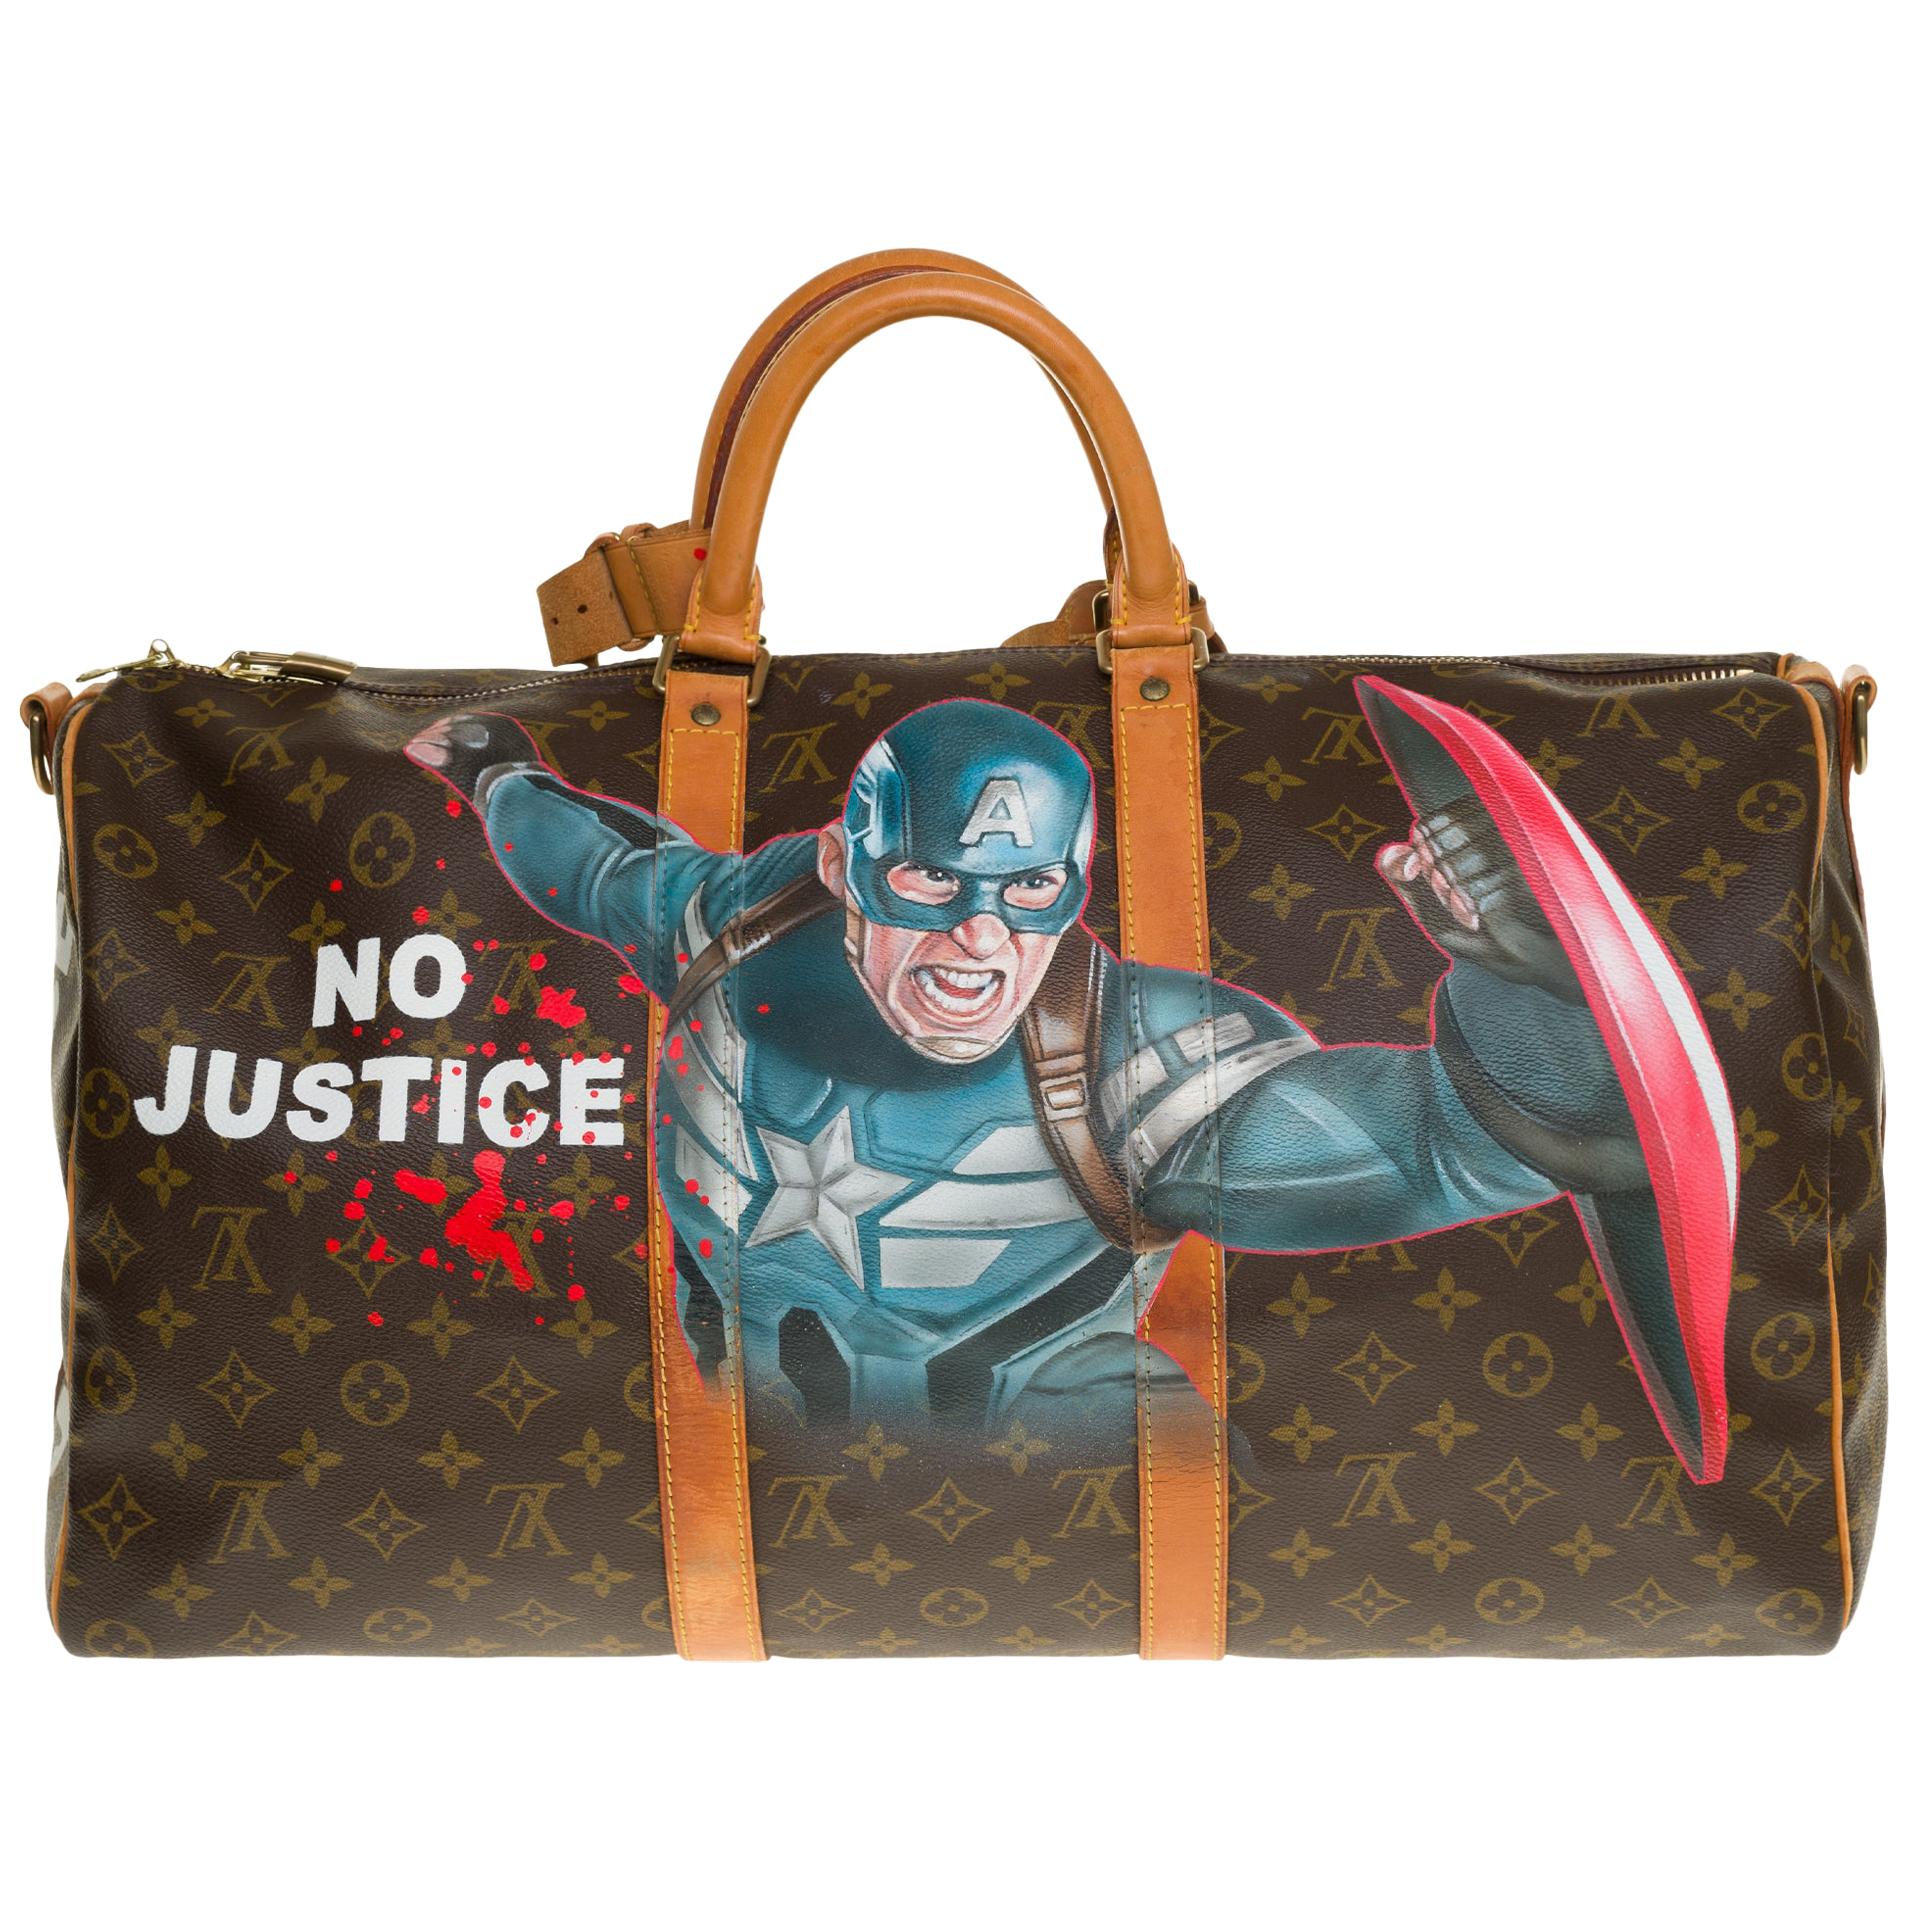 Customized "Captain America" Louis Vuitton Keepall 50 travel bag in brown canvas